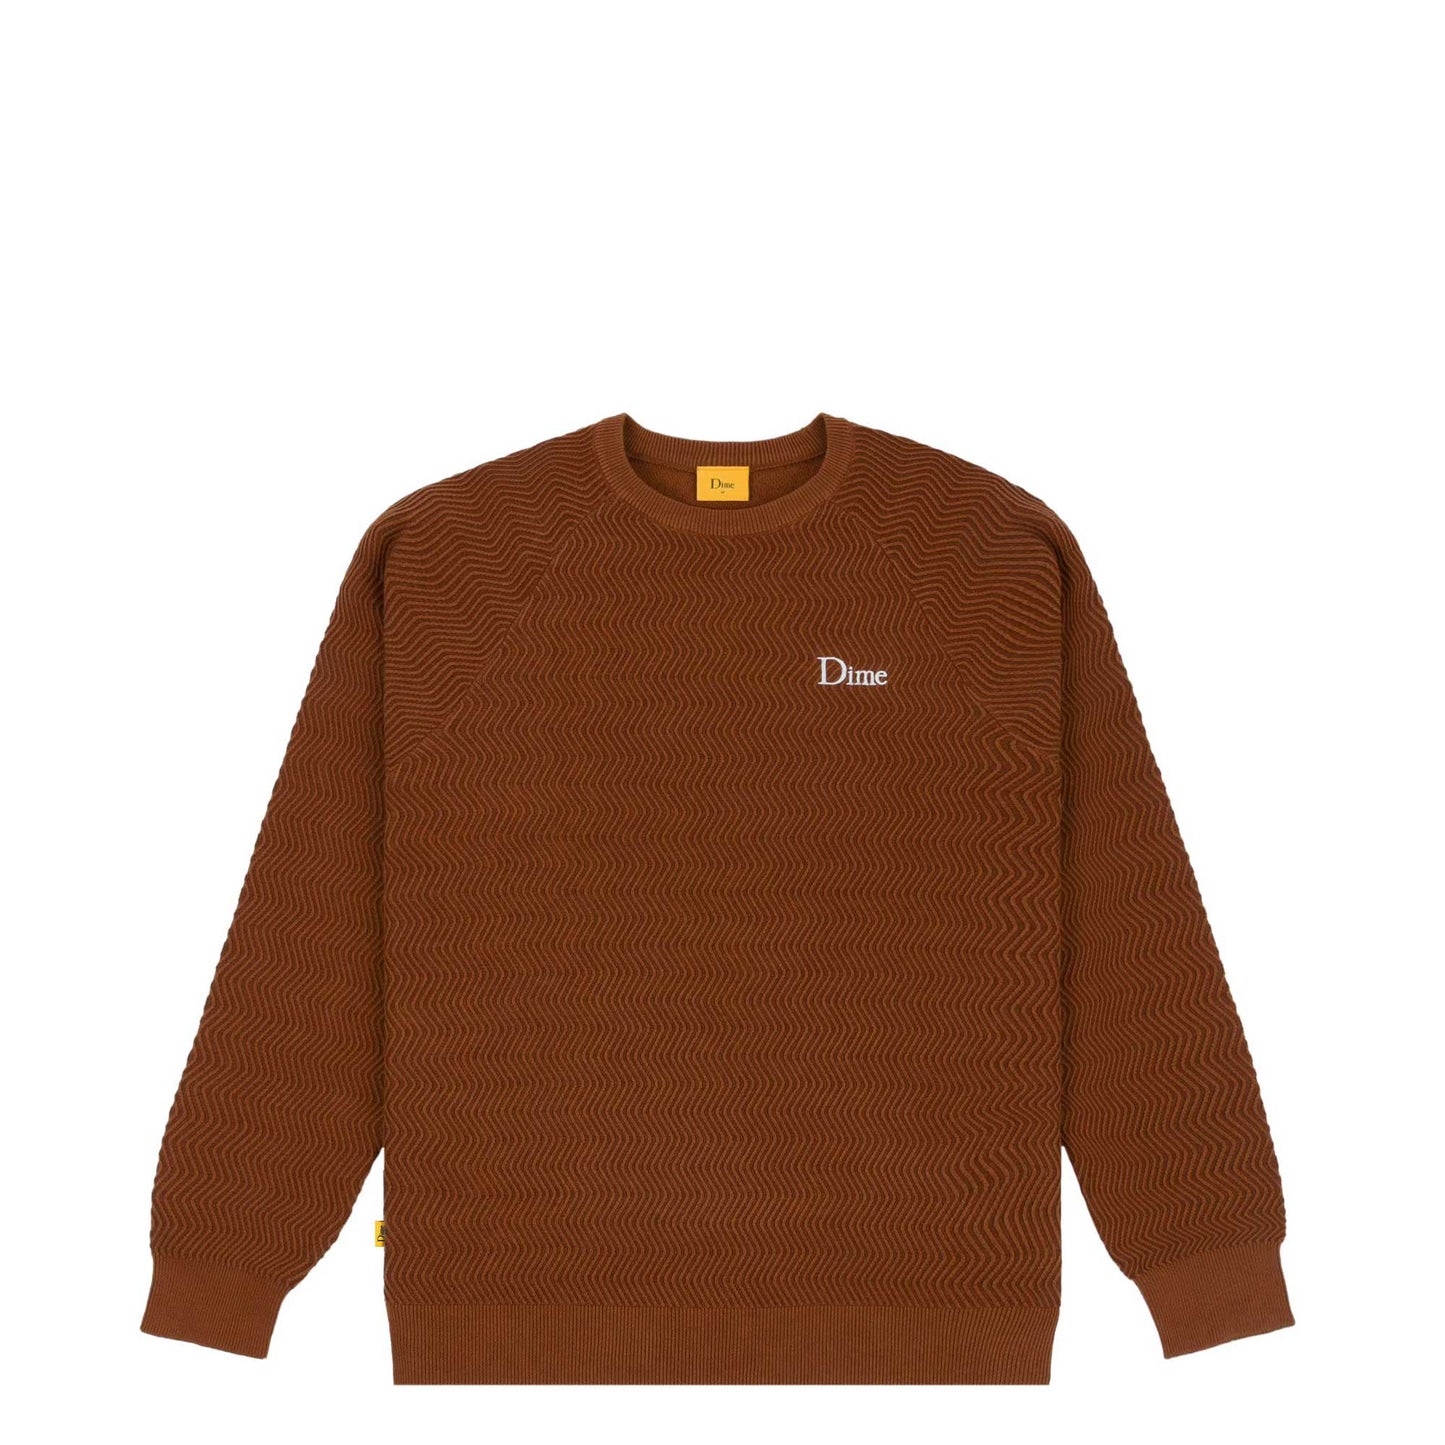 Dime Wave Cable Knit Sweater, raw sienna - Tiki Room Skateboards - 1